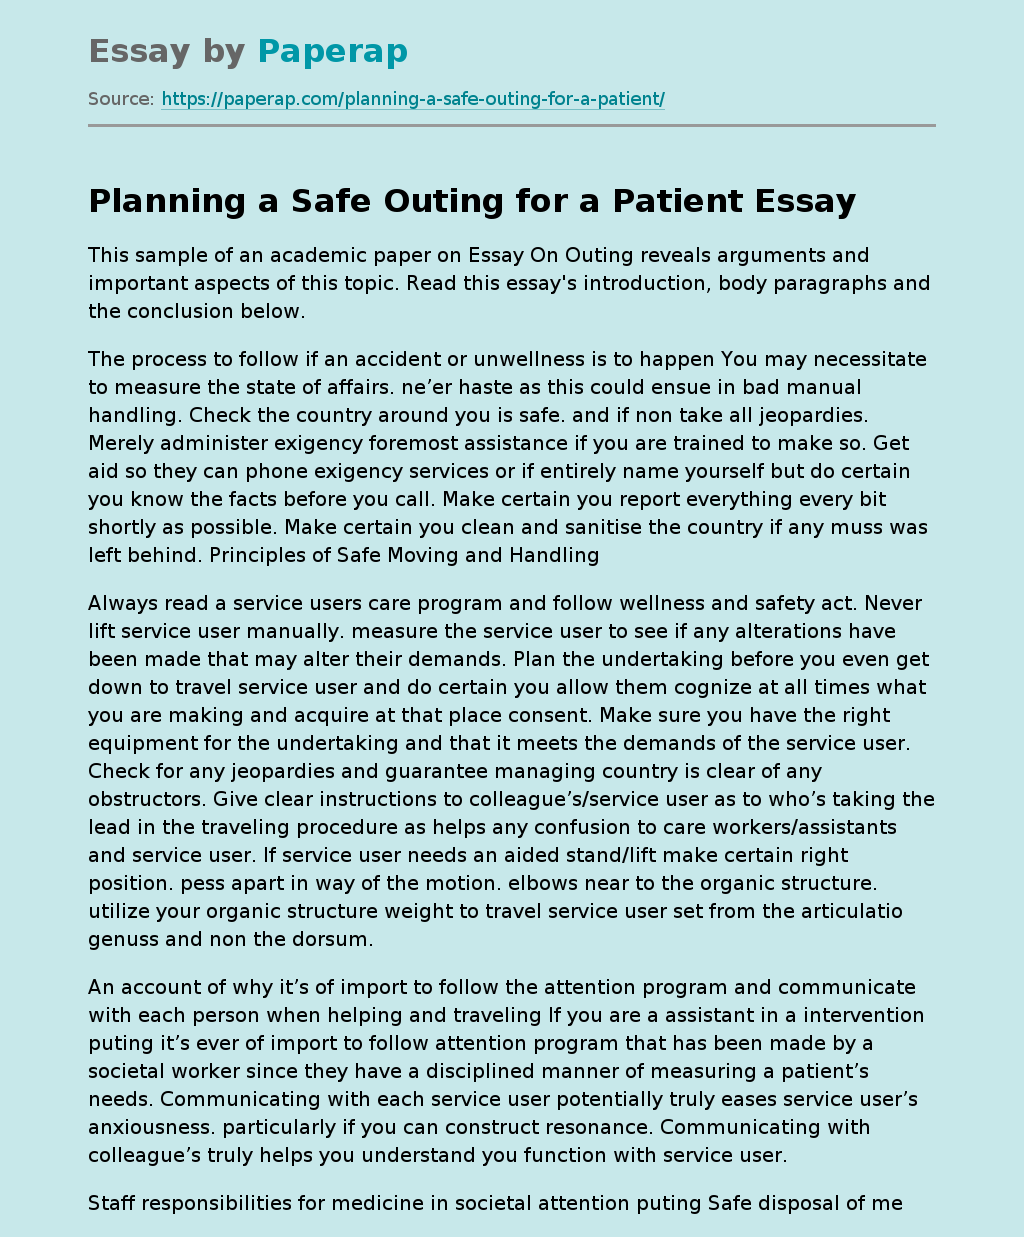 Planning a Safe Outing for a Patient